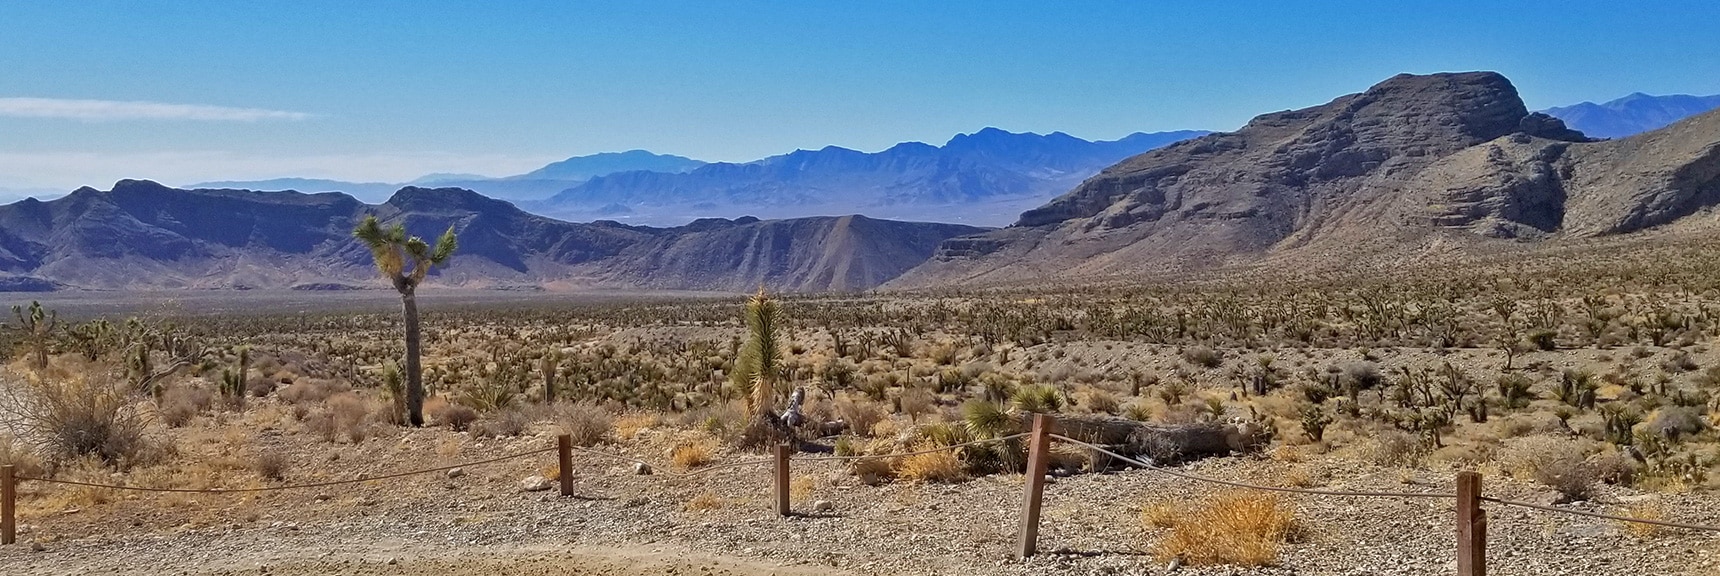 La Madre Mountains Wilderness Viewed from Mormon Well Road | Lower Mormon Well Road | Sheep Range, Desert National Wildlife Refuge, Nevada